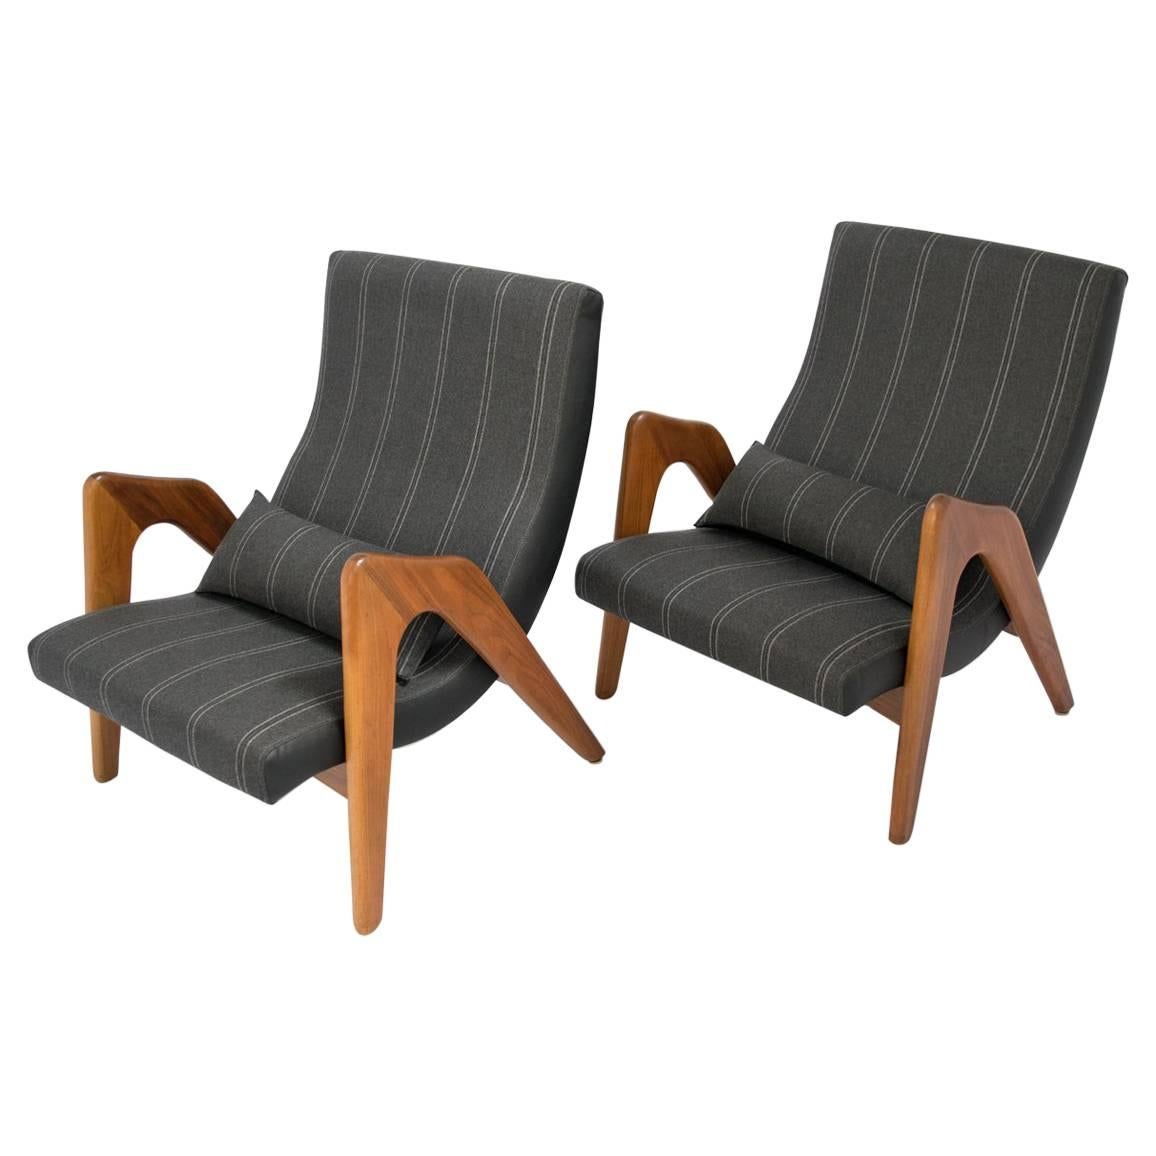 Mid-Century Lounge Chair by Adrian Pearsall for Craft Associates Pair Available